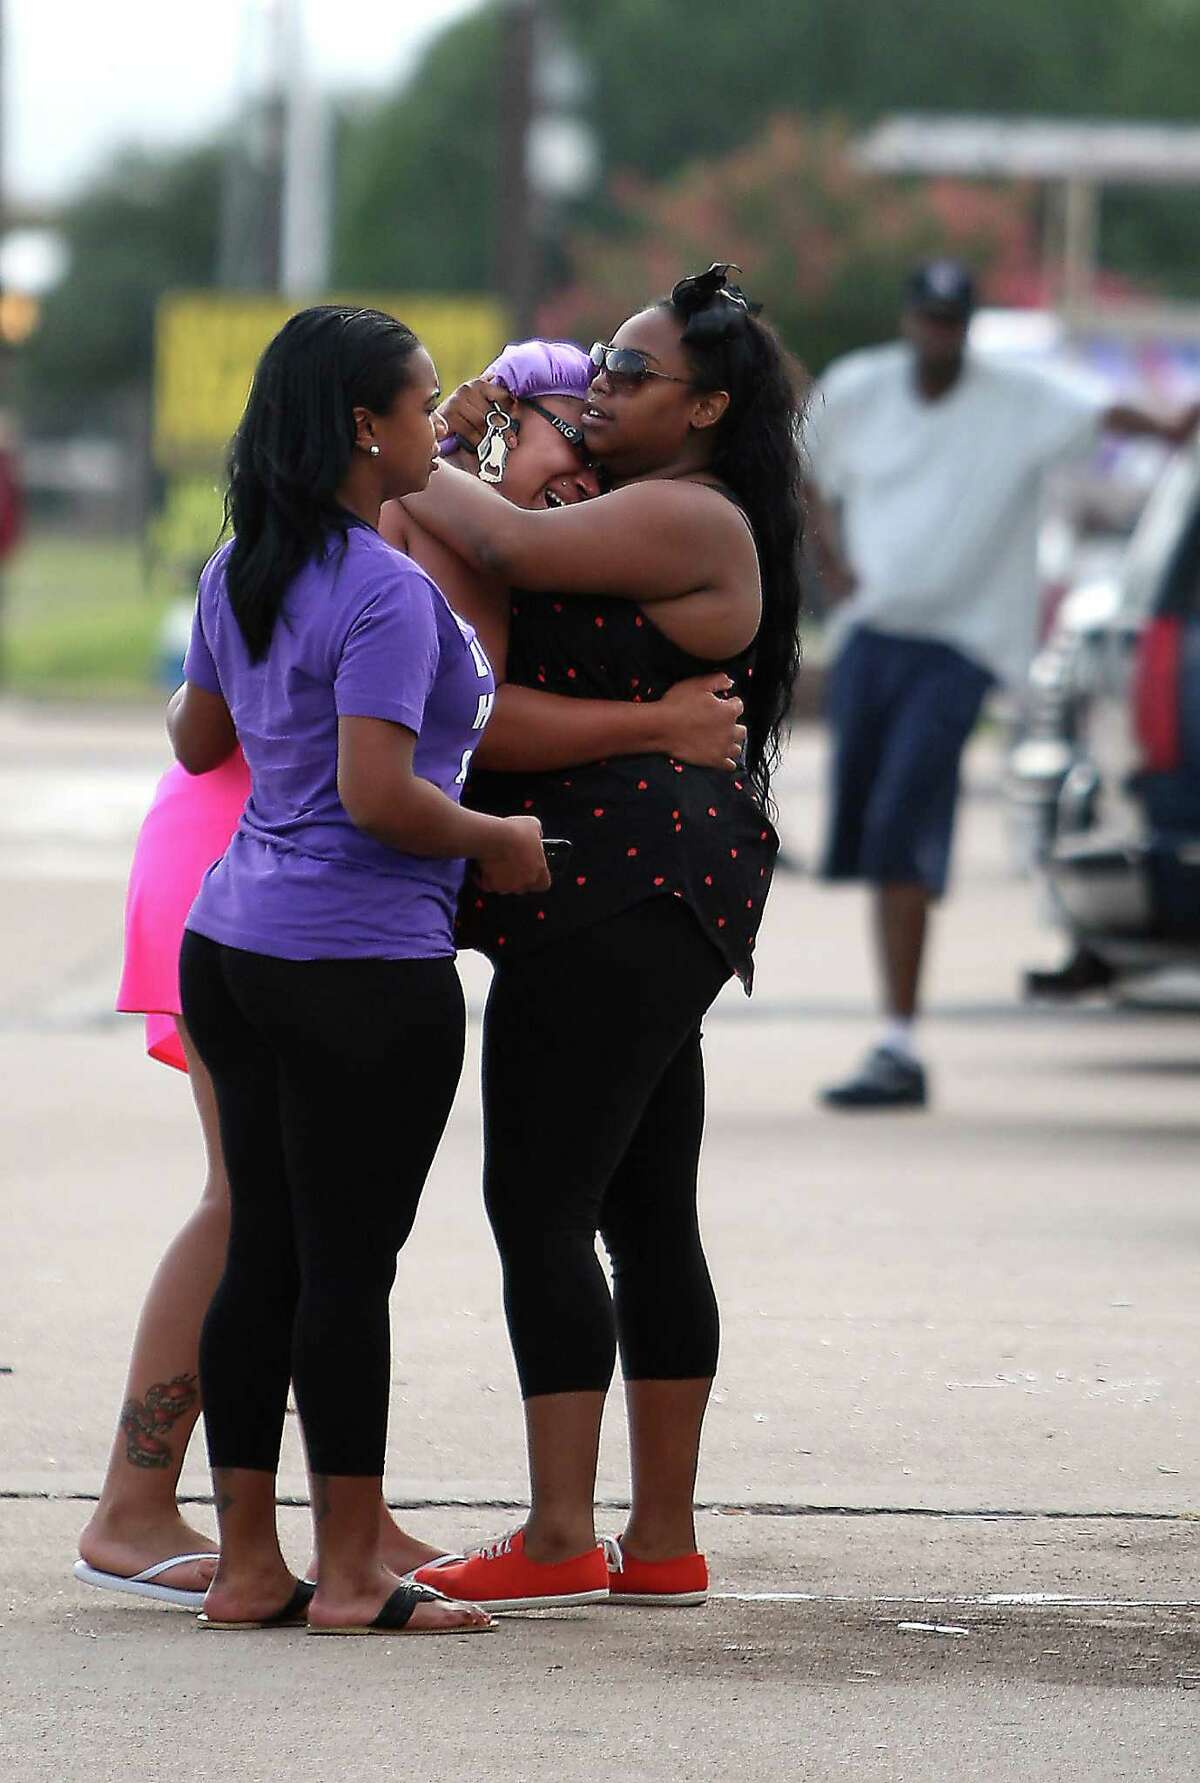 Unidentified family and friends react during a vigil at the scene of a strip club where three people were shot to death and two were injured including local rapper Trae Tha Truth, early Wednesday morning, Wednesday, June 20, 2012, in Houston.